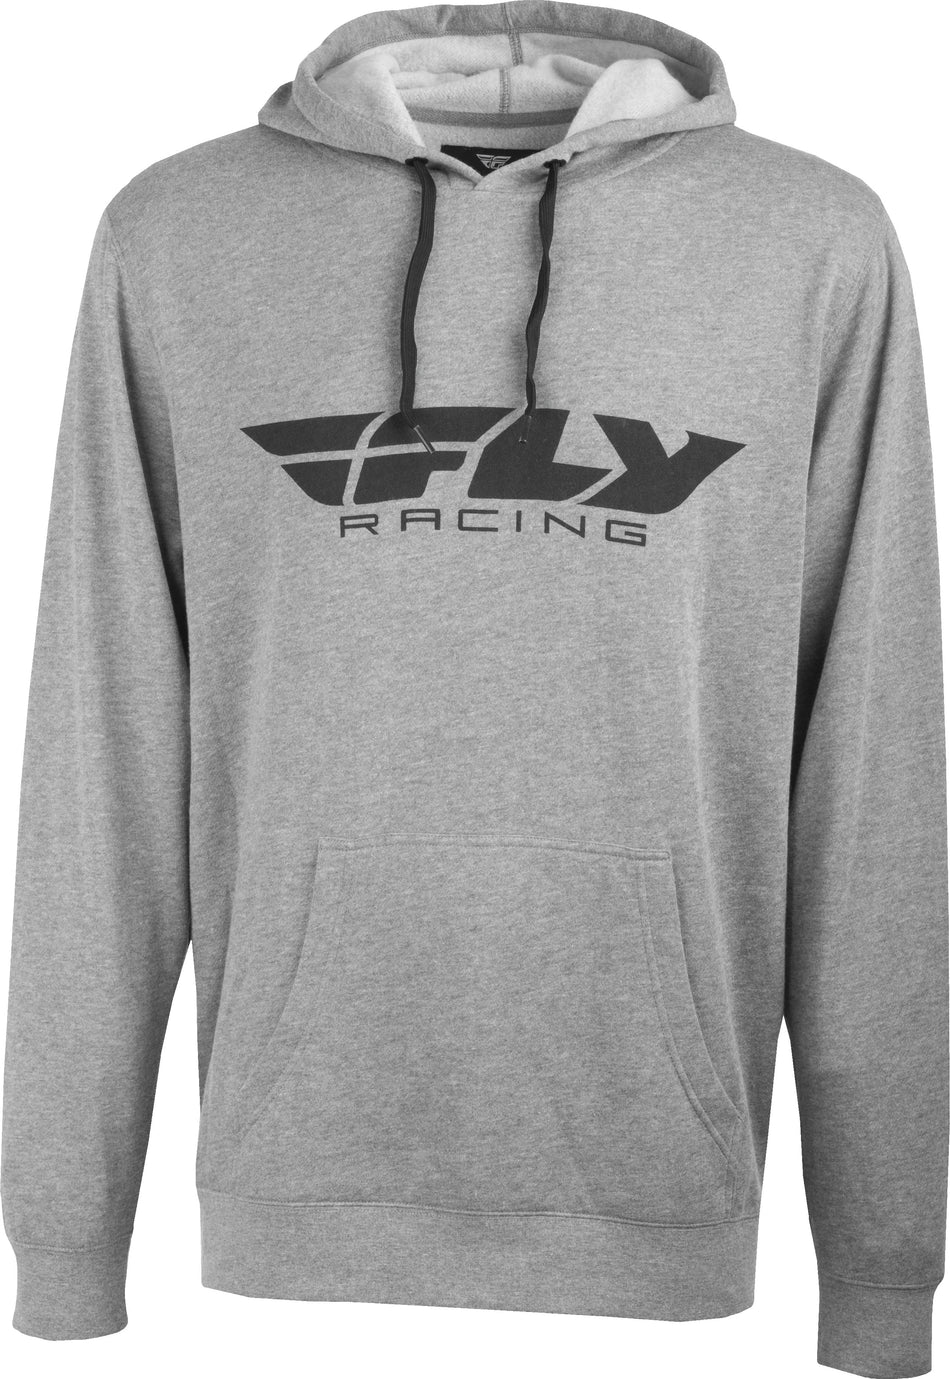 FLY RACING Fly Corporate Pullover Hoodie Grey Heather Xl 354-0036X